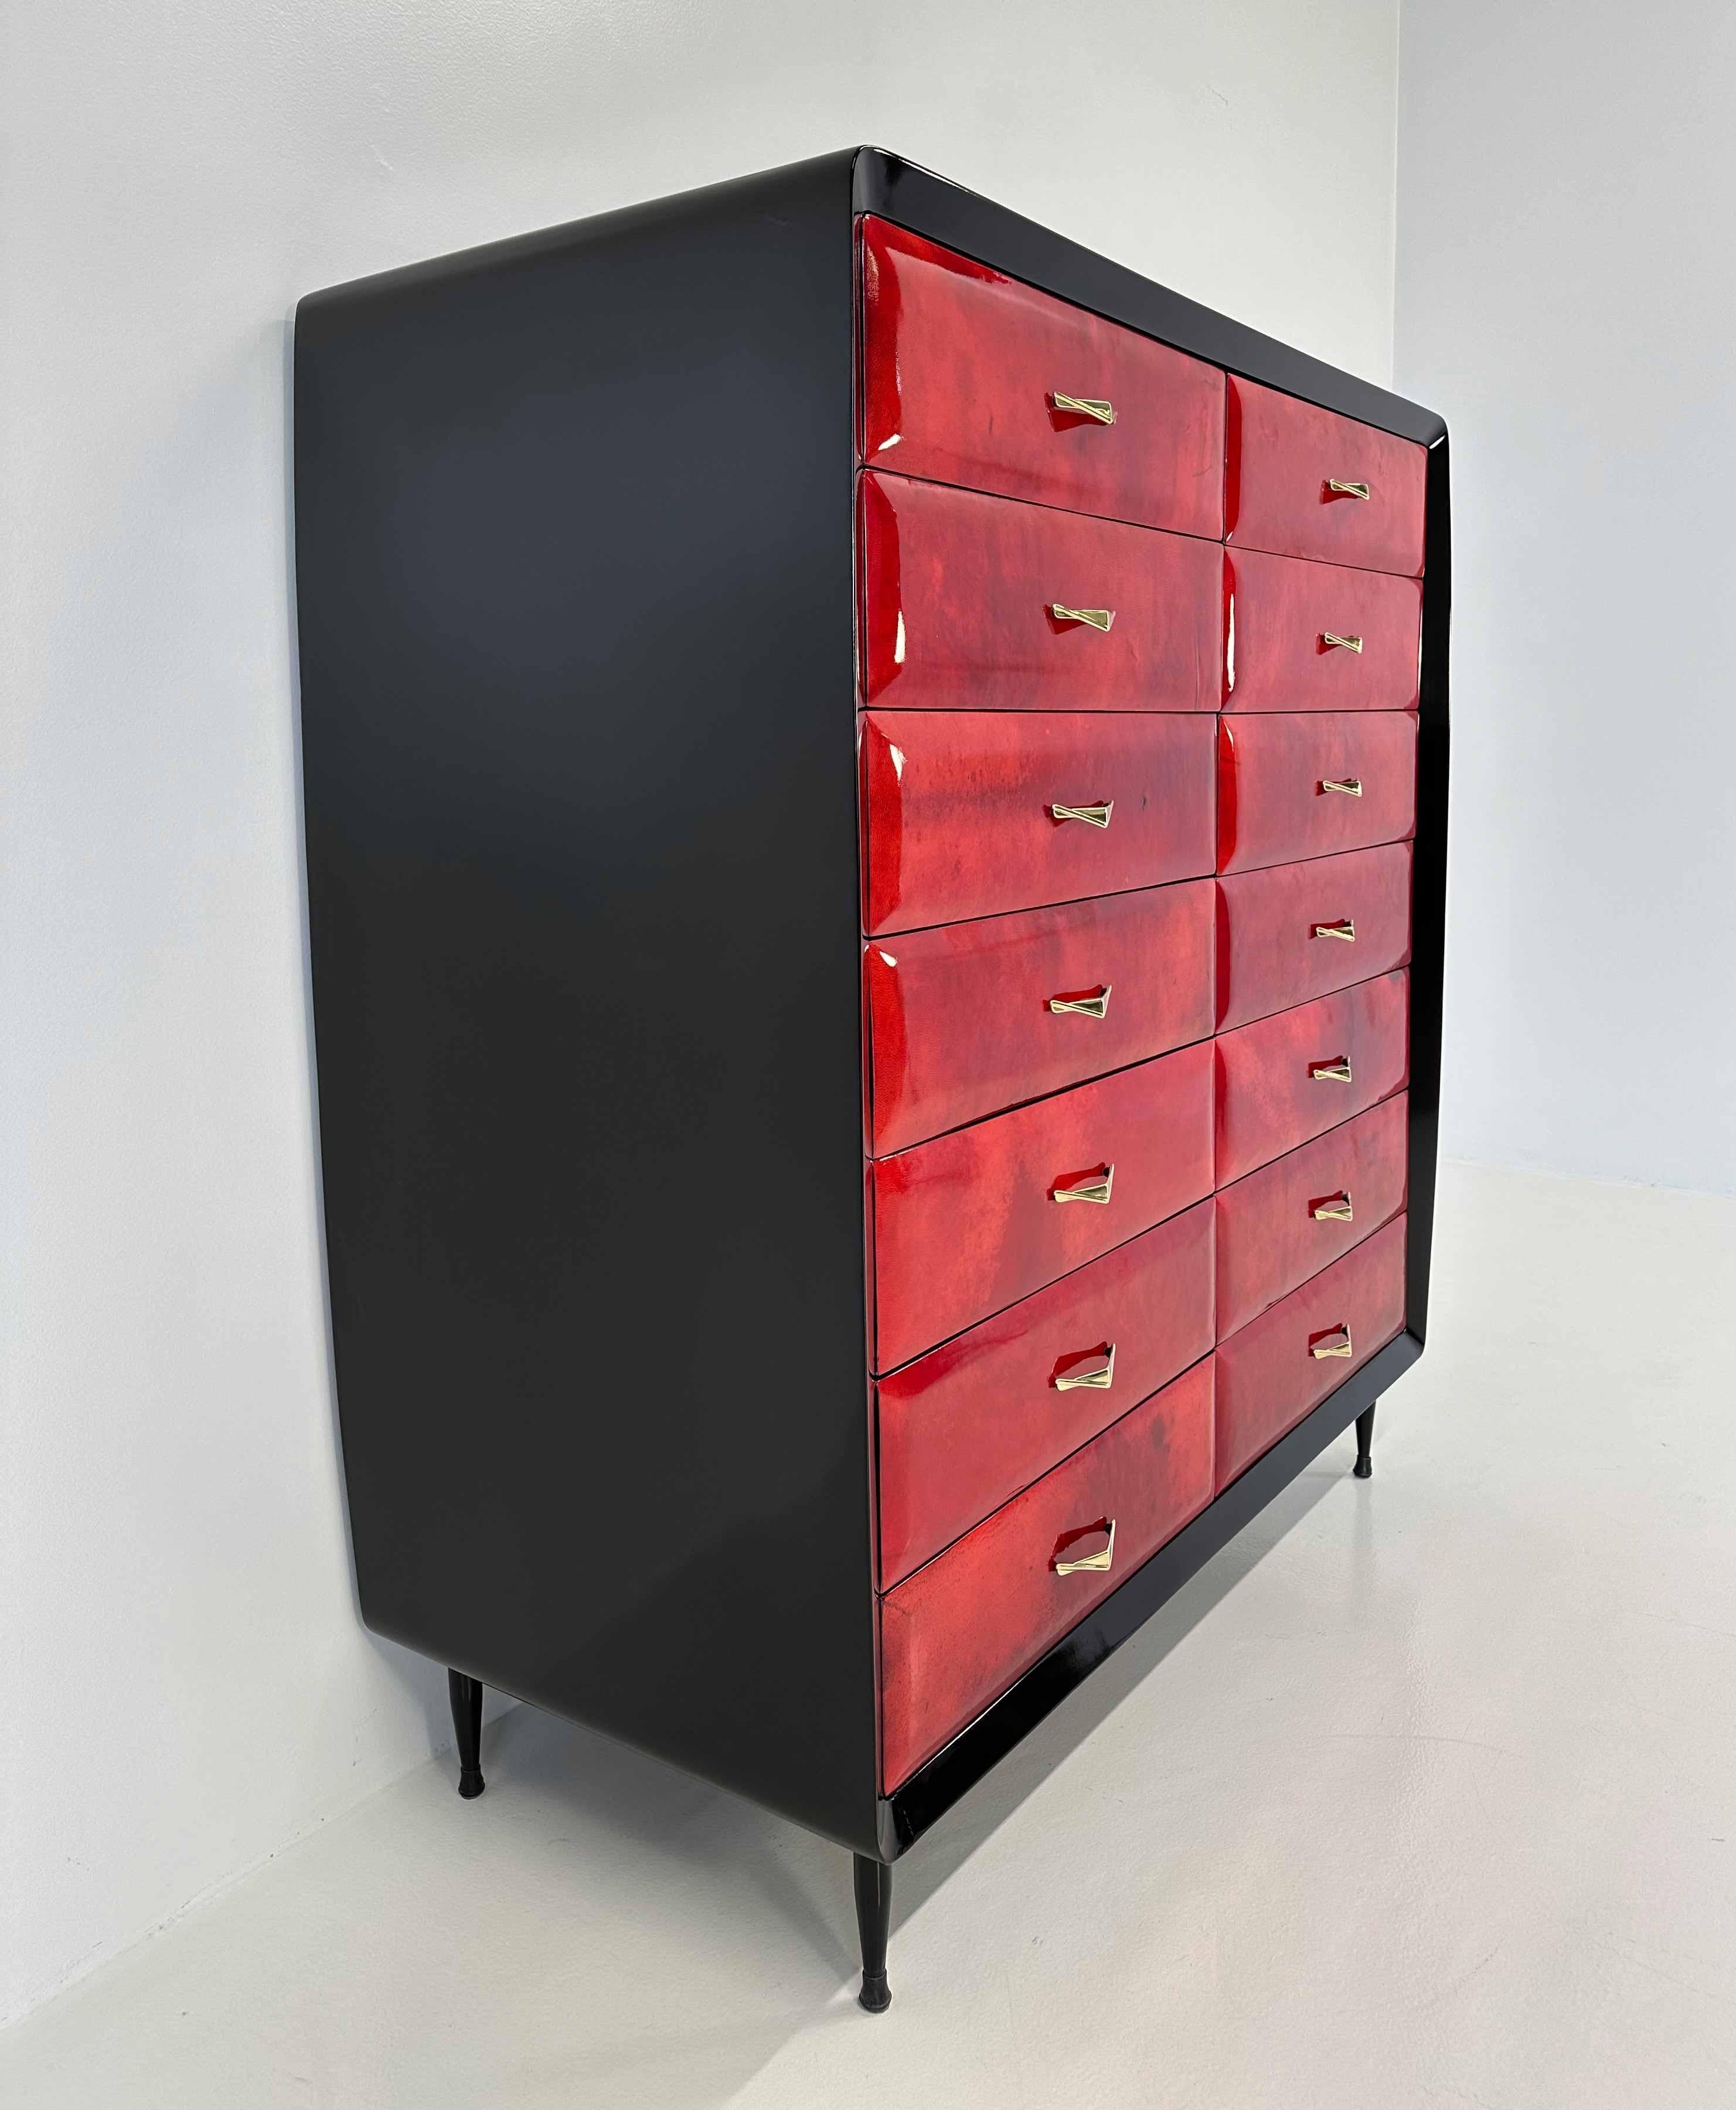 Italian Art Deco Cherry Red Parchment Chest of 14 Drawers, 1950s For Sale 1